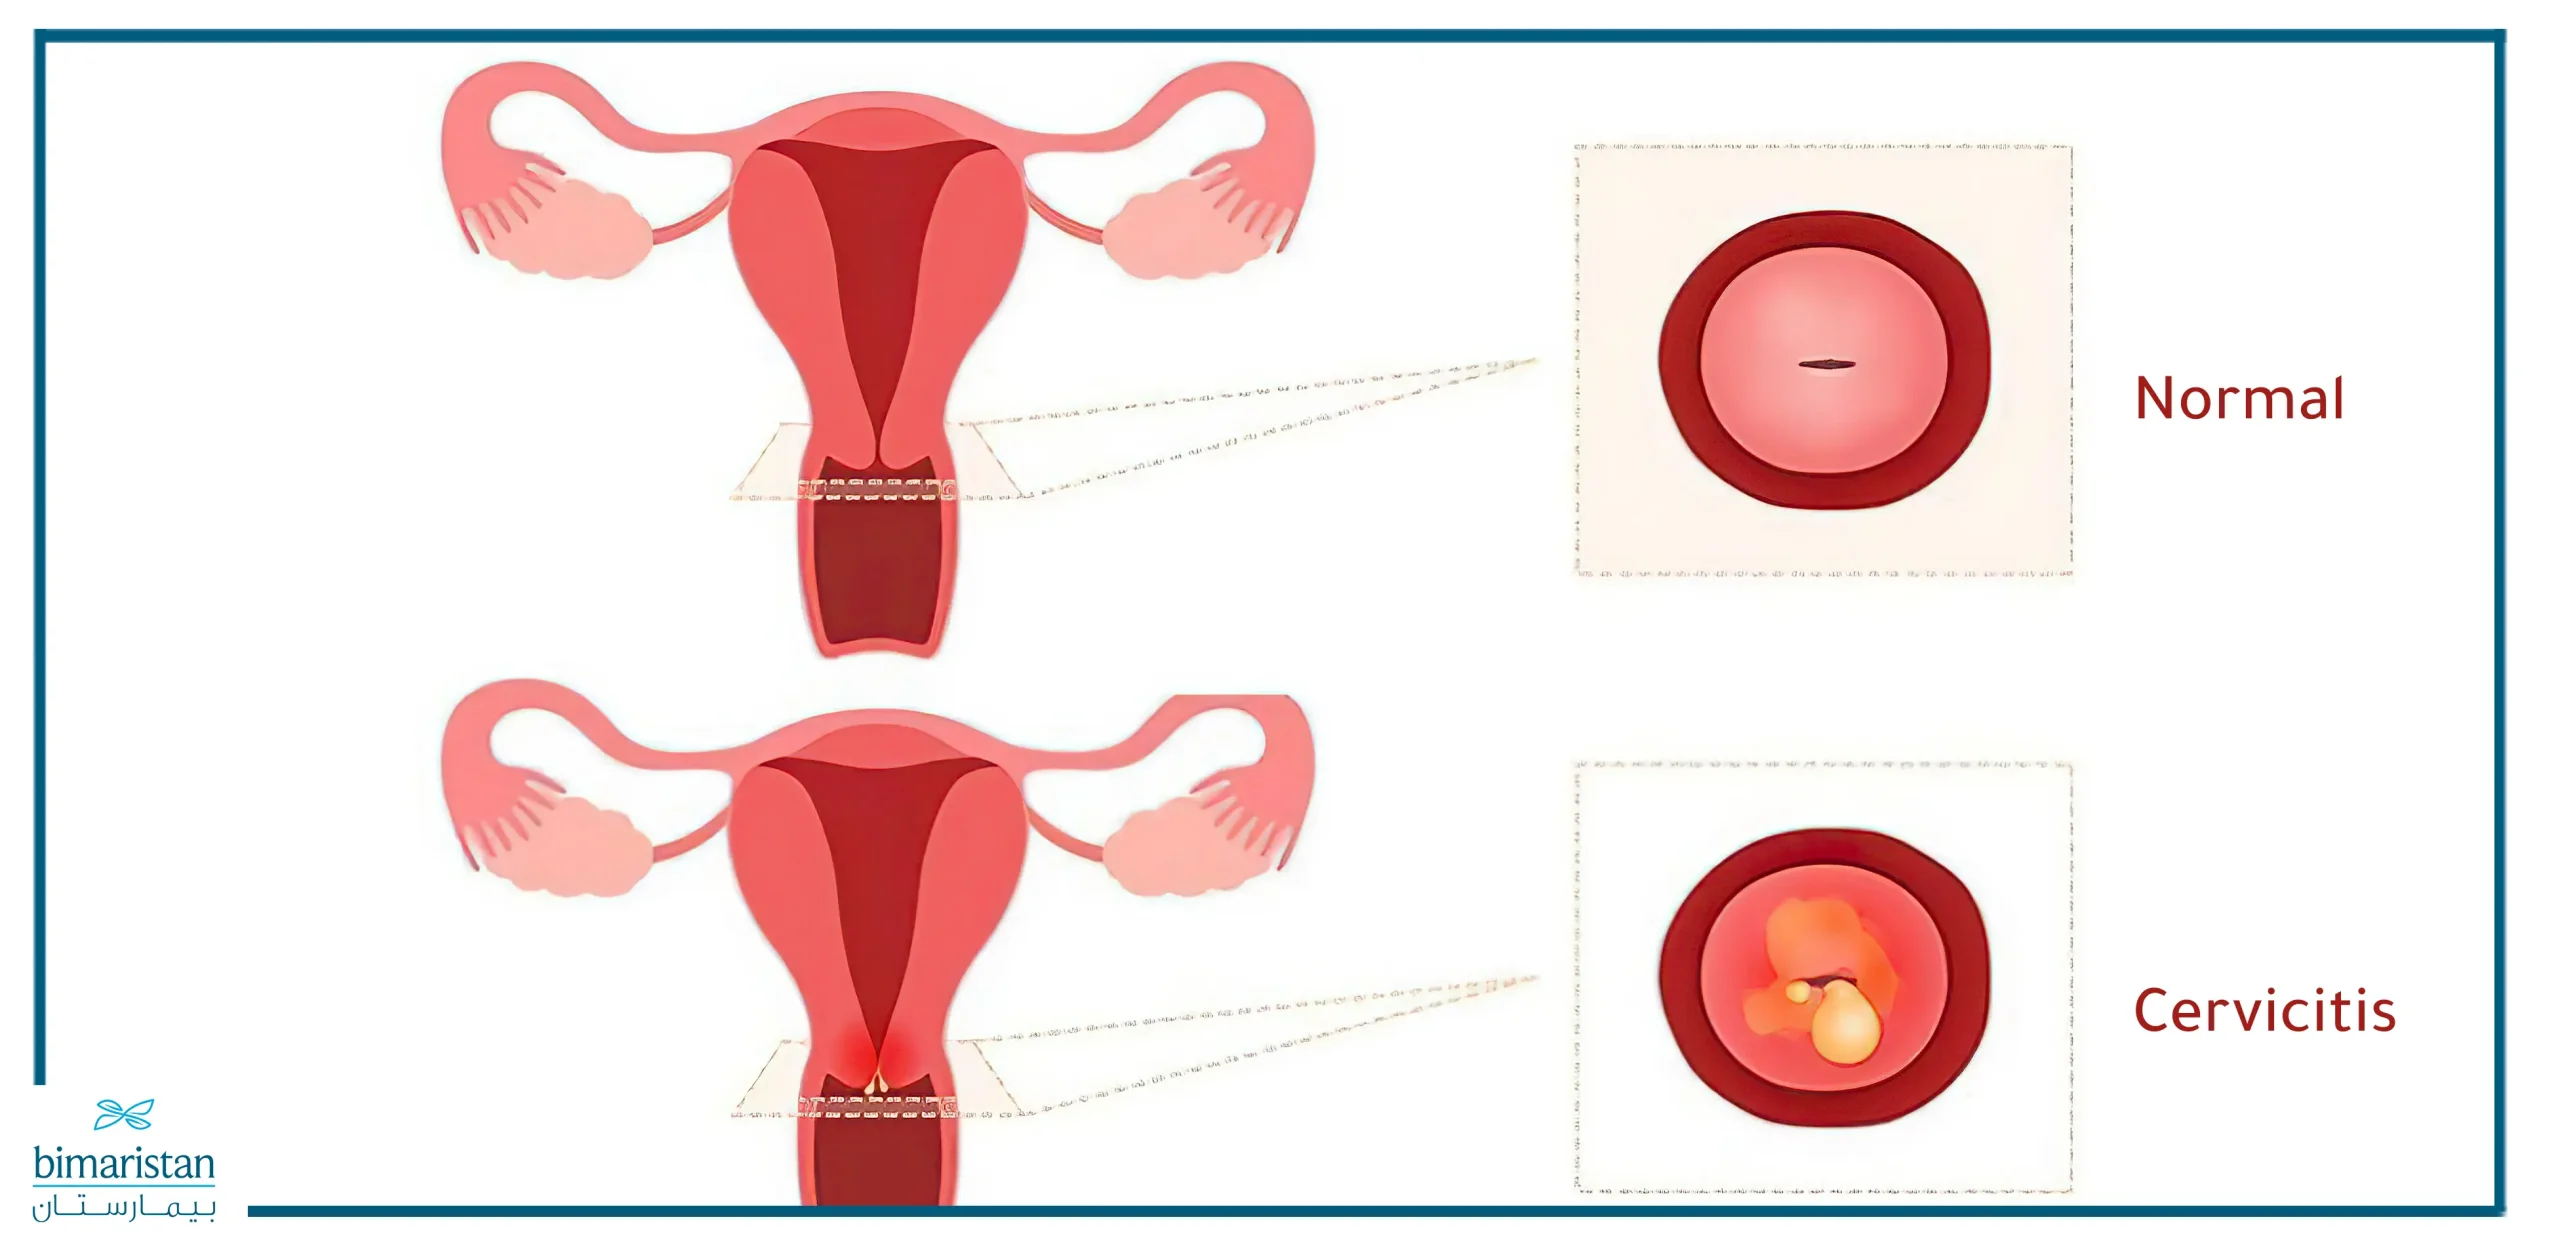 The difference between normal and inflamed cervix